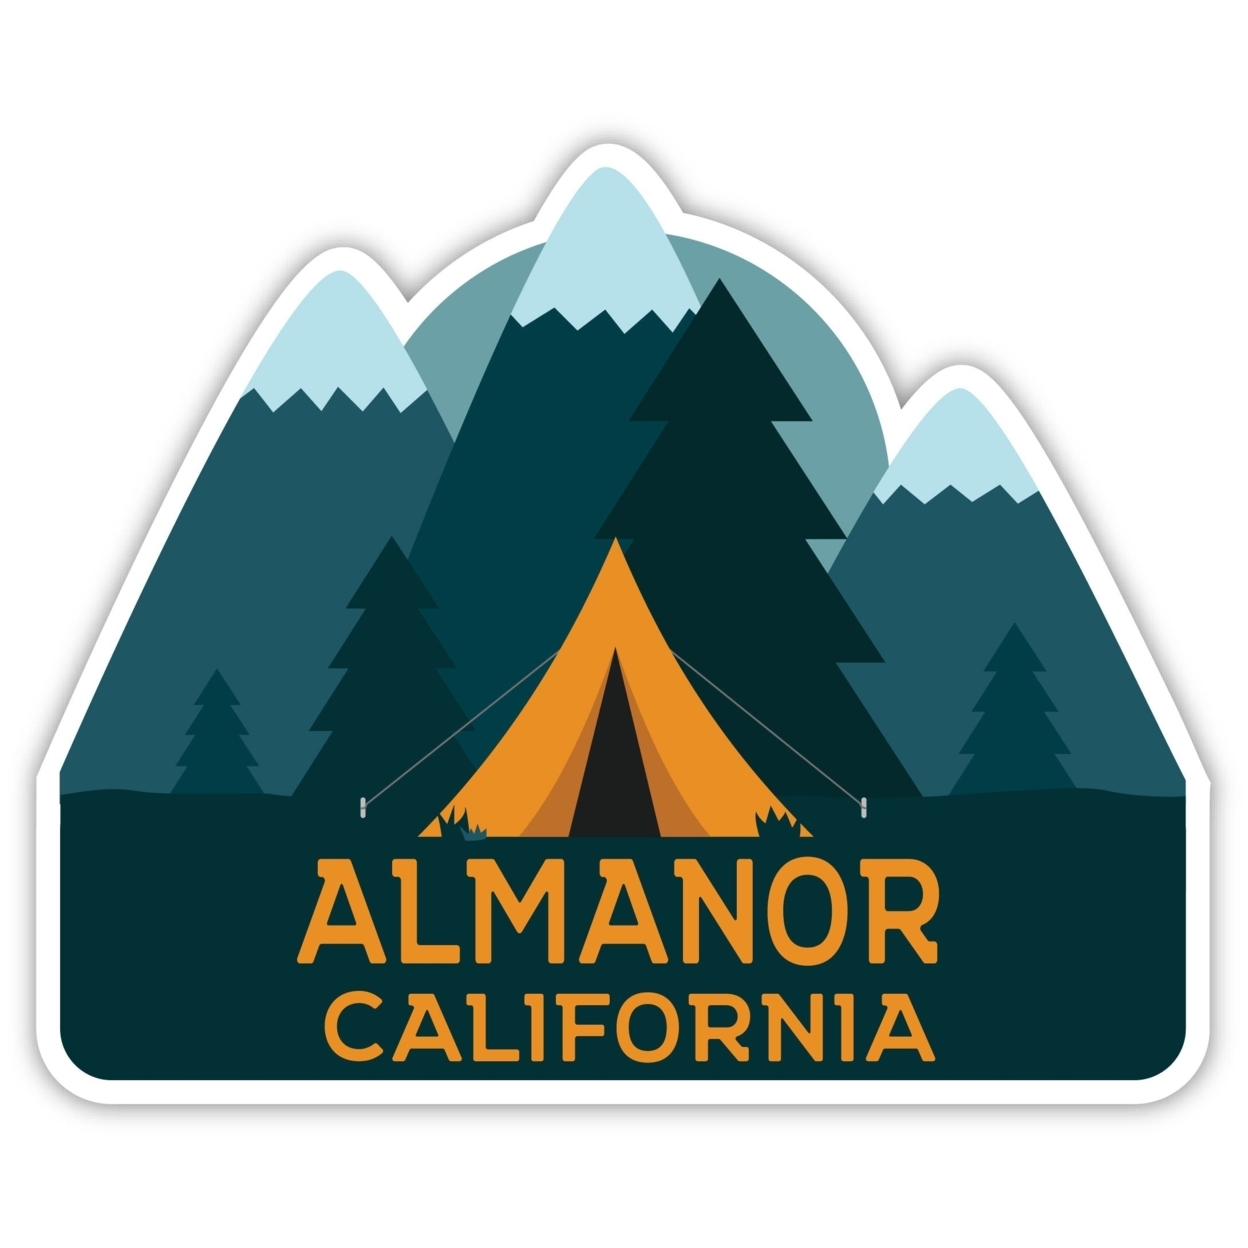 Almanor California Souvenir Decorative Stickers (Choose Theme And Size) - 4-Pack, 4-Inch, Bear